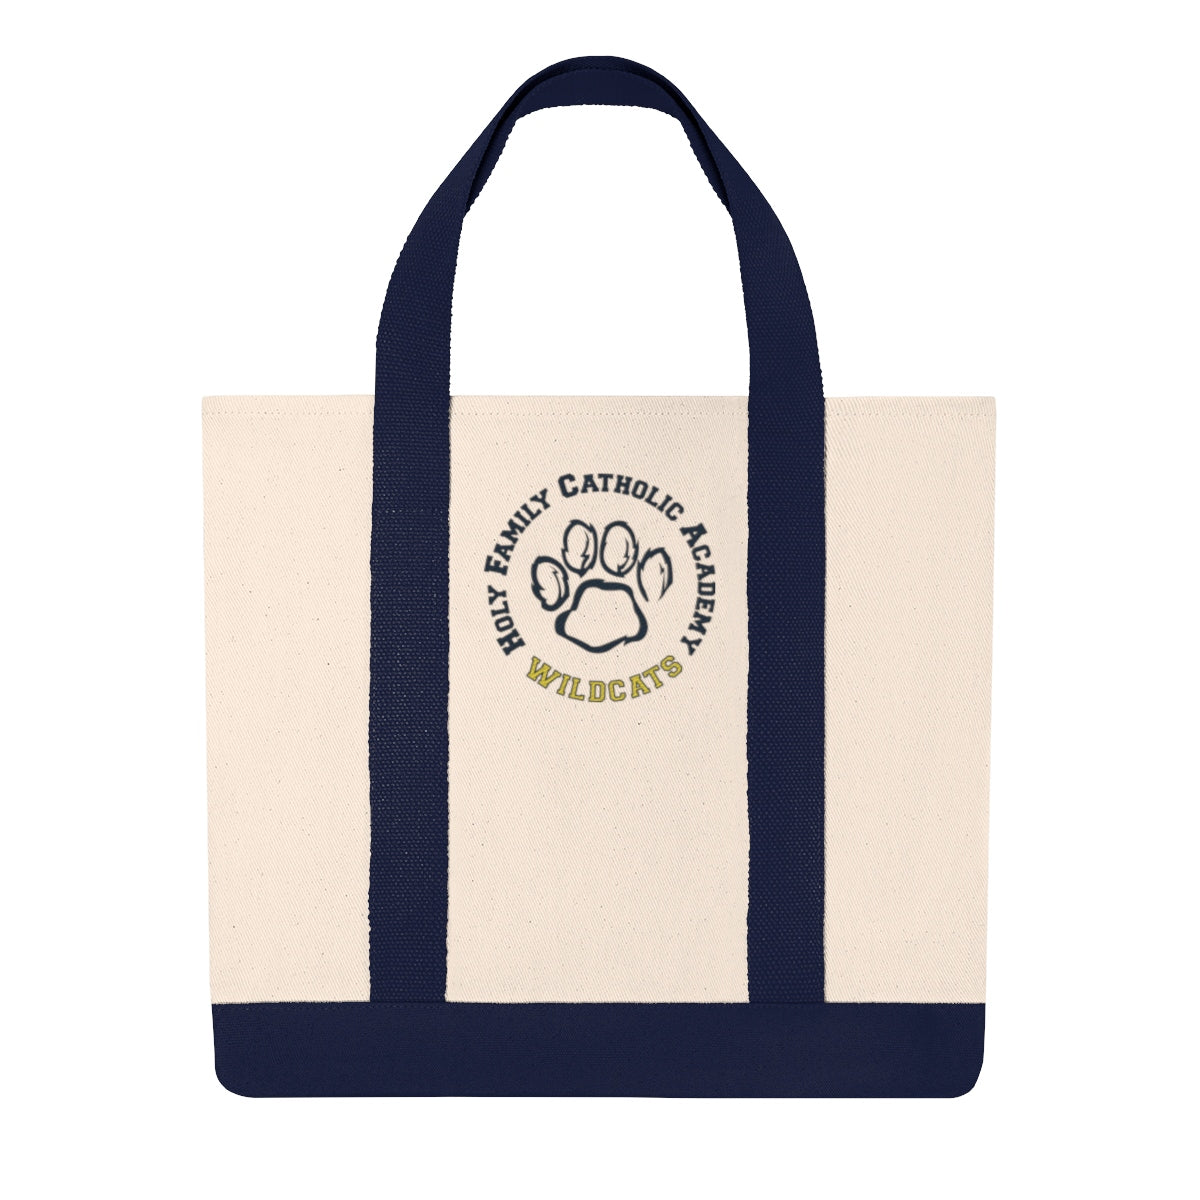 Holy Family Catholic Academy (HFCA) - Embroidered Shopping Tote